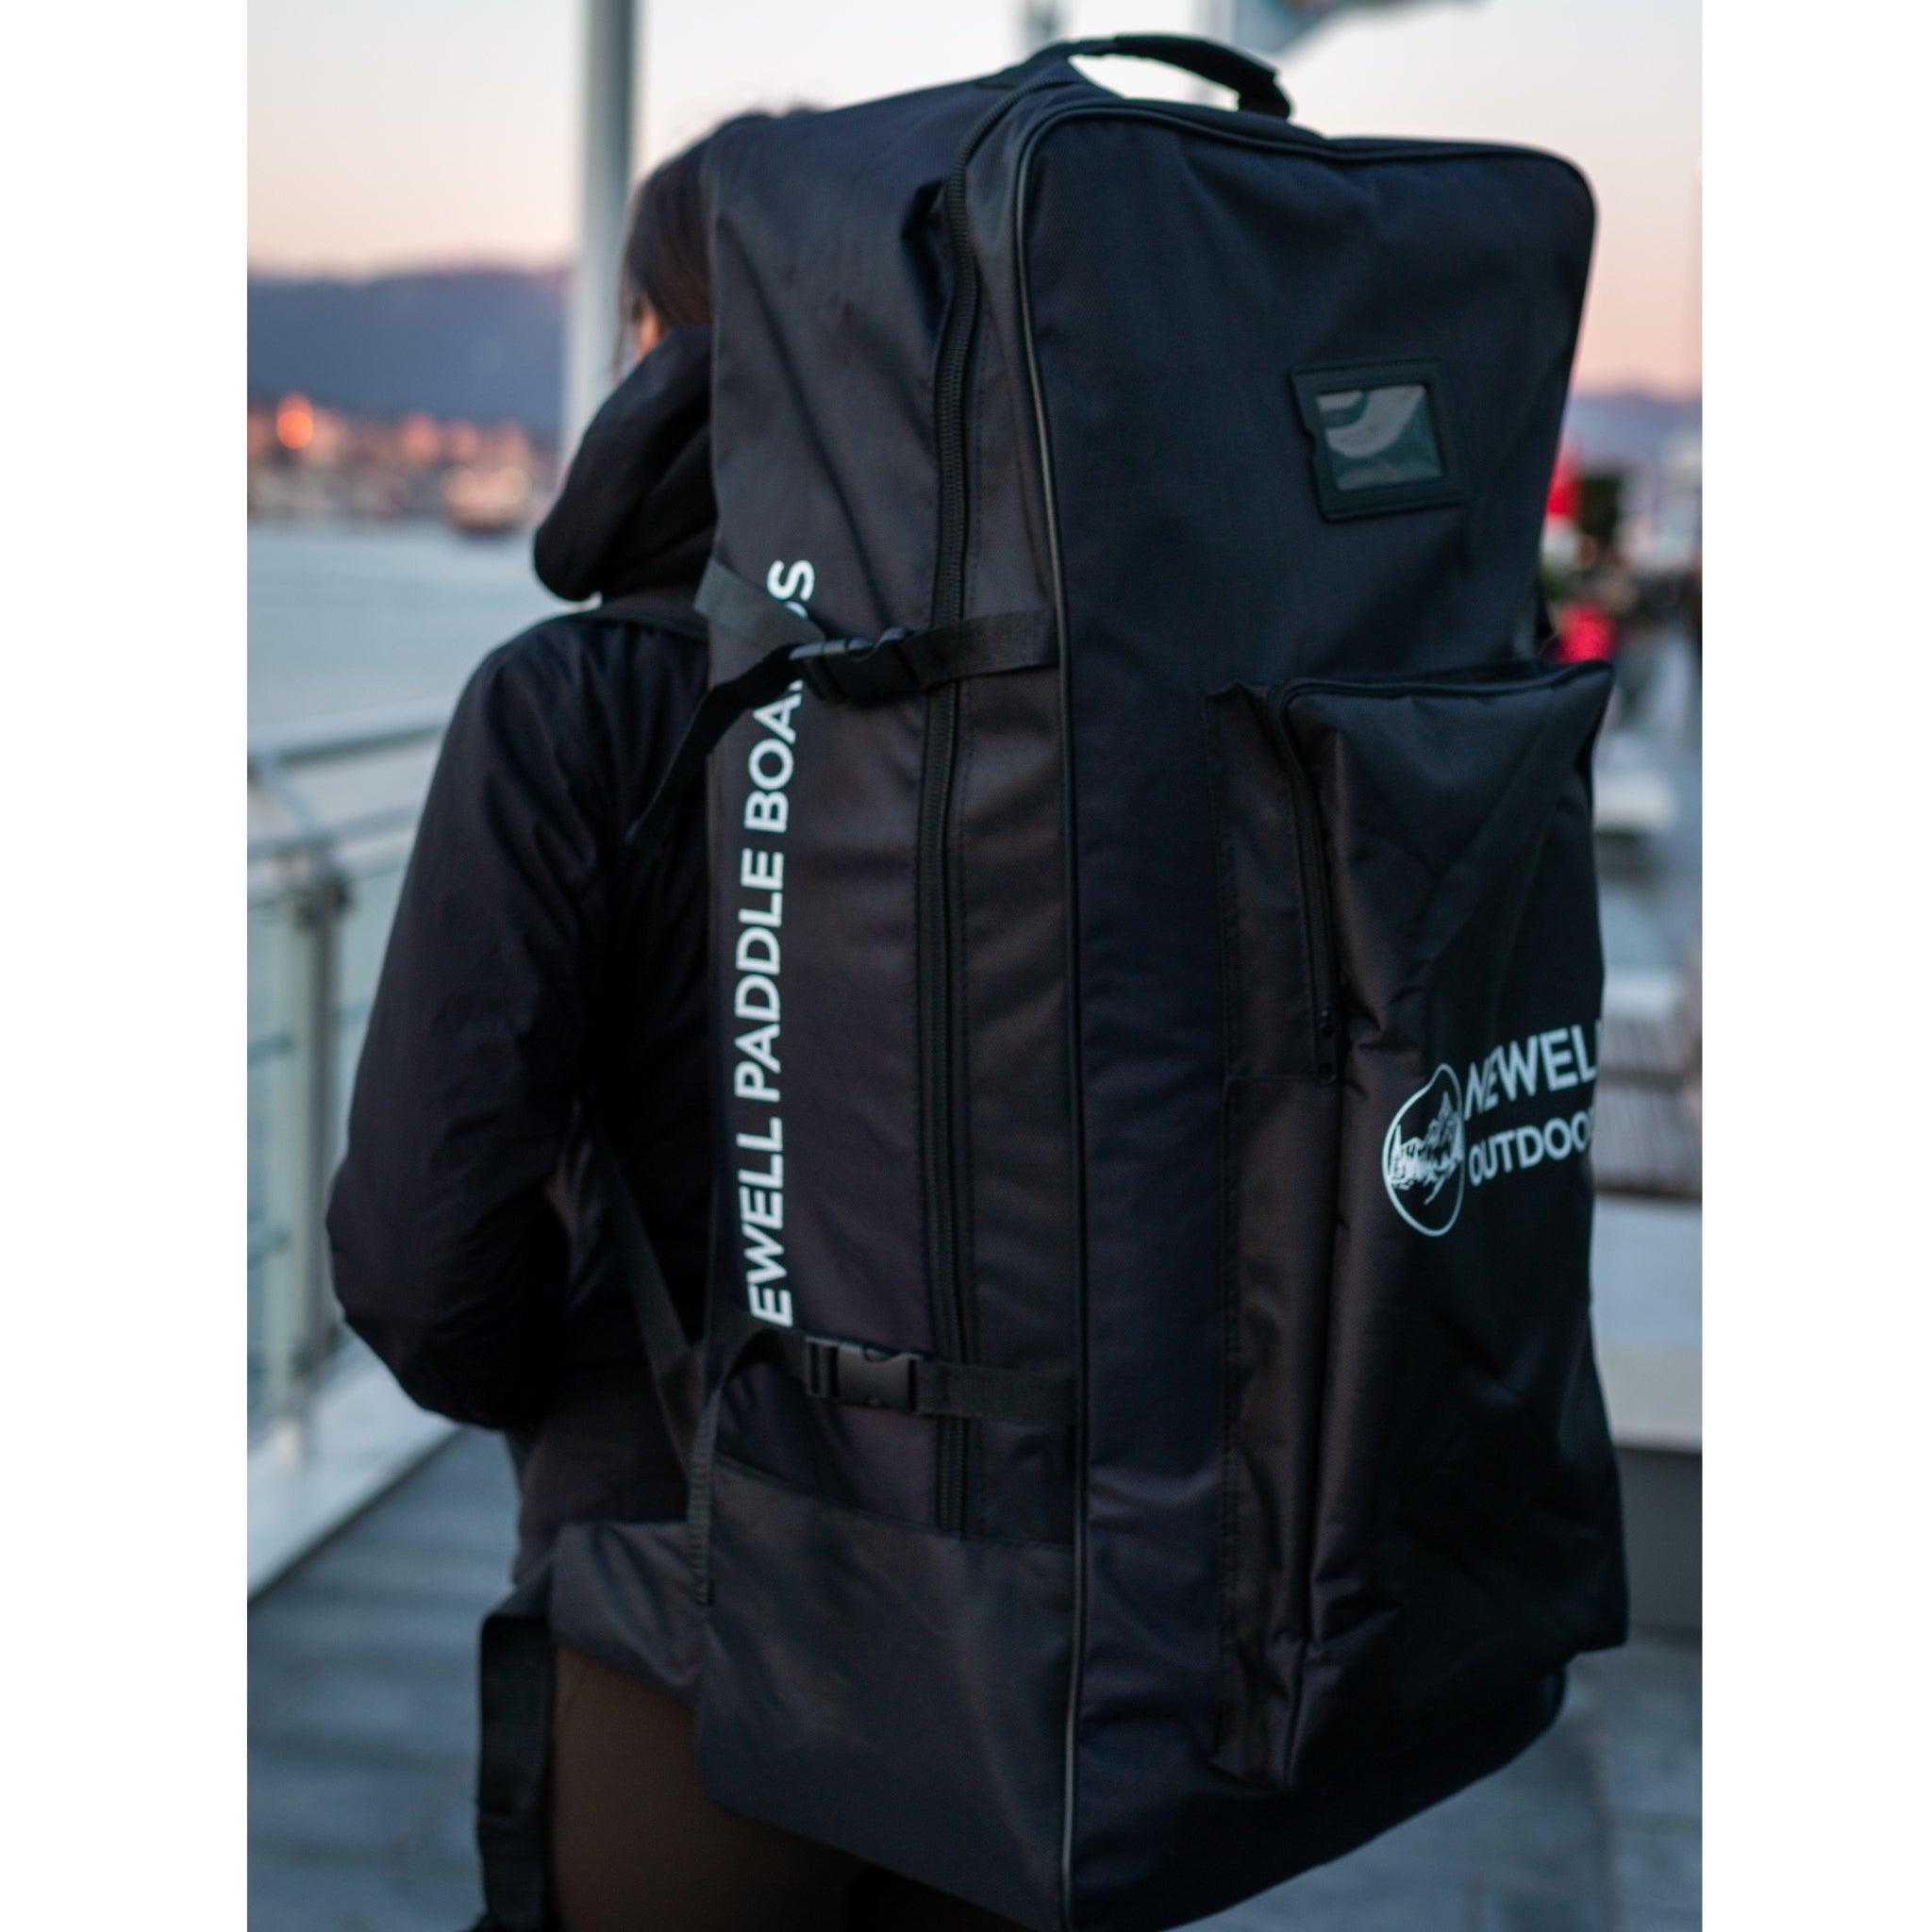 The Wippersnapper paddleboard bag Newell Outdoors.